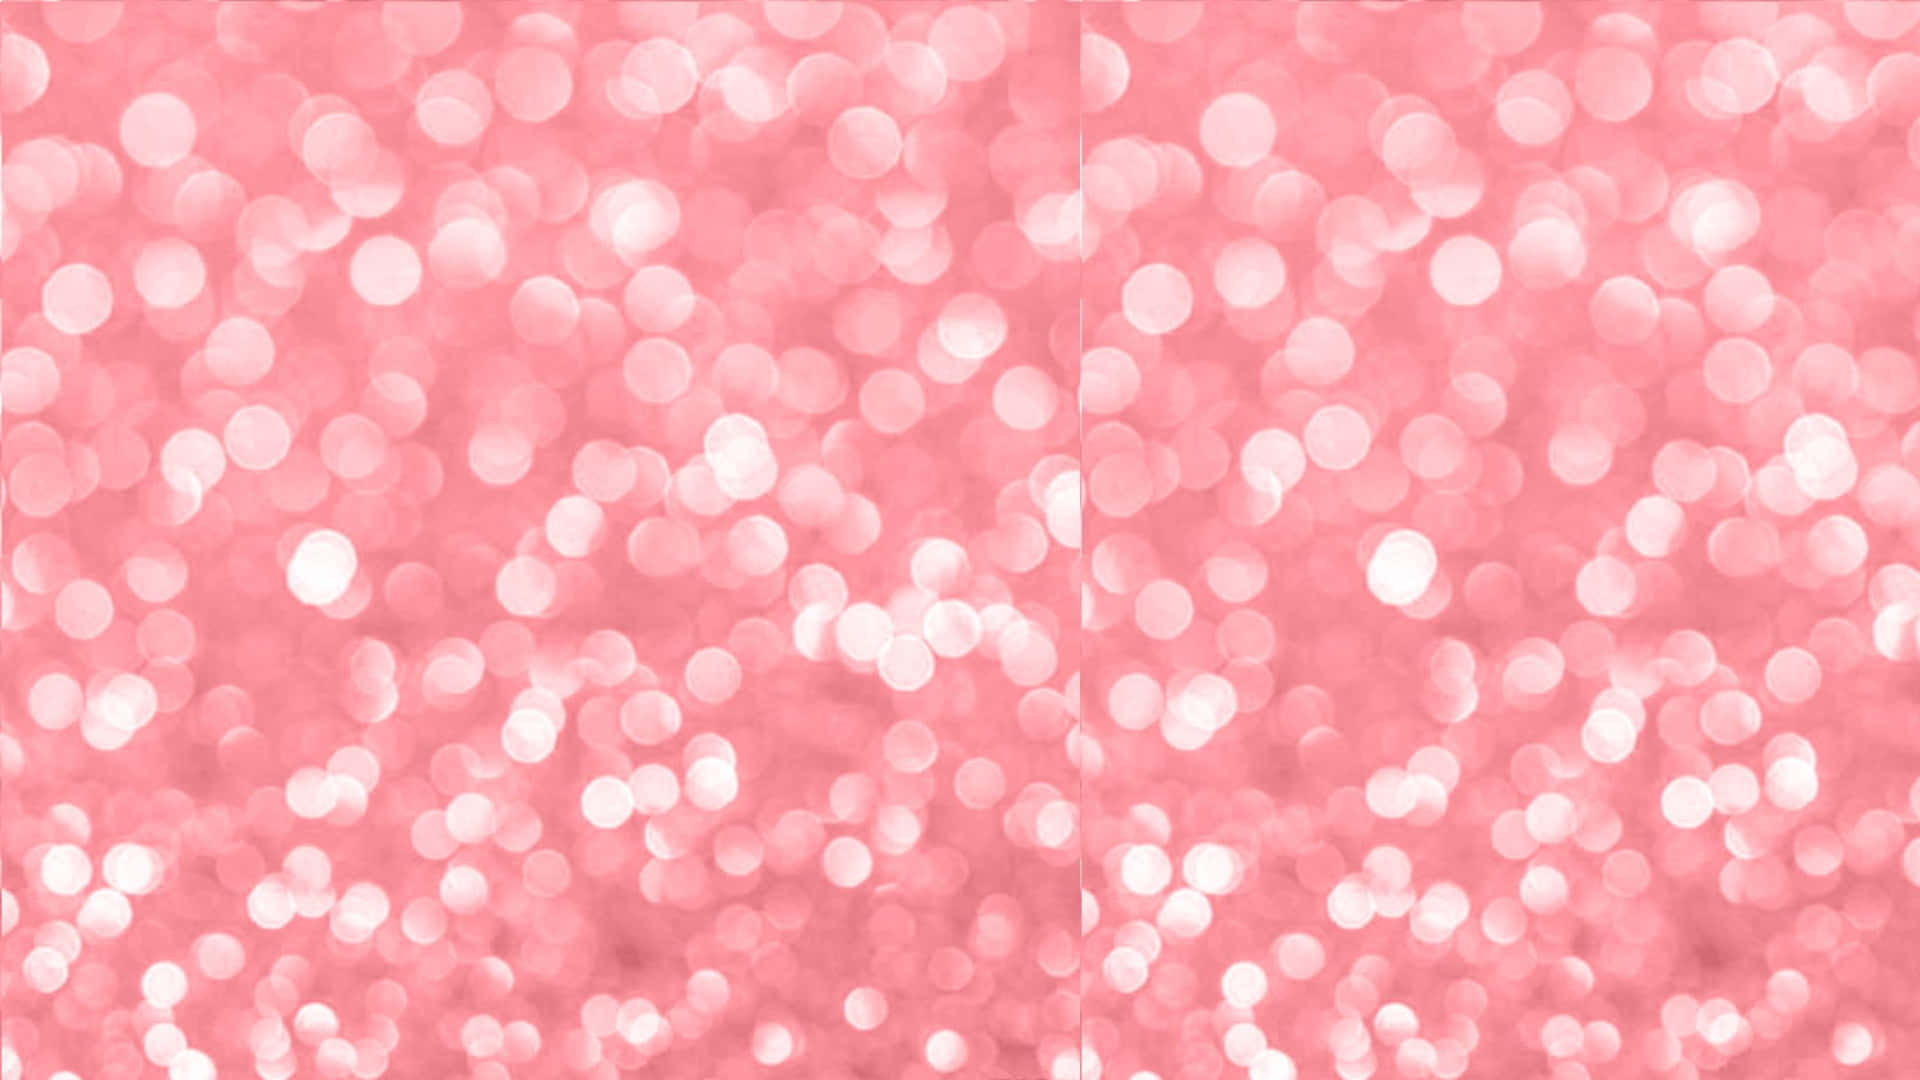 Sparkly Pink Shiny Bokeh Background